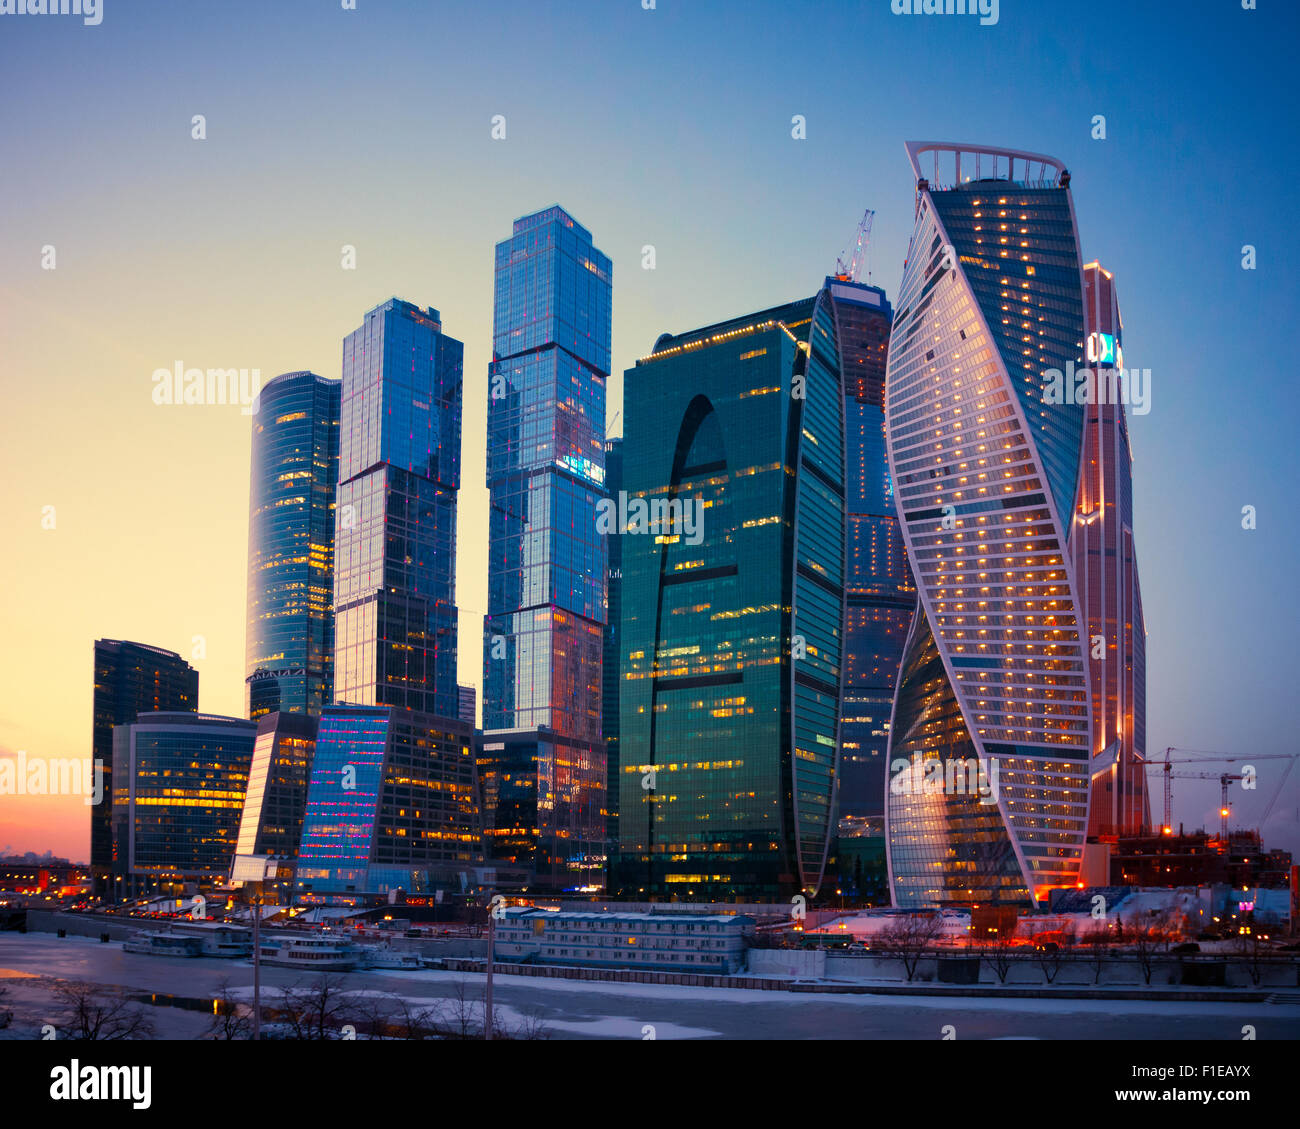 Illuminated Skyscrapers Buildings of Moscow City business complex at dusk, Moscow, Russia. Stock Photo